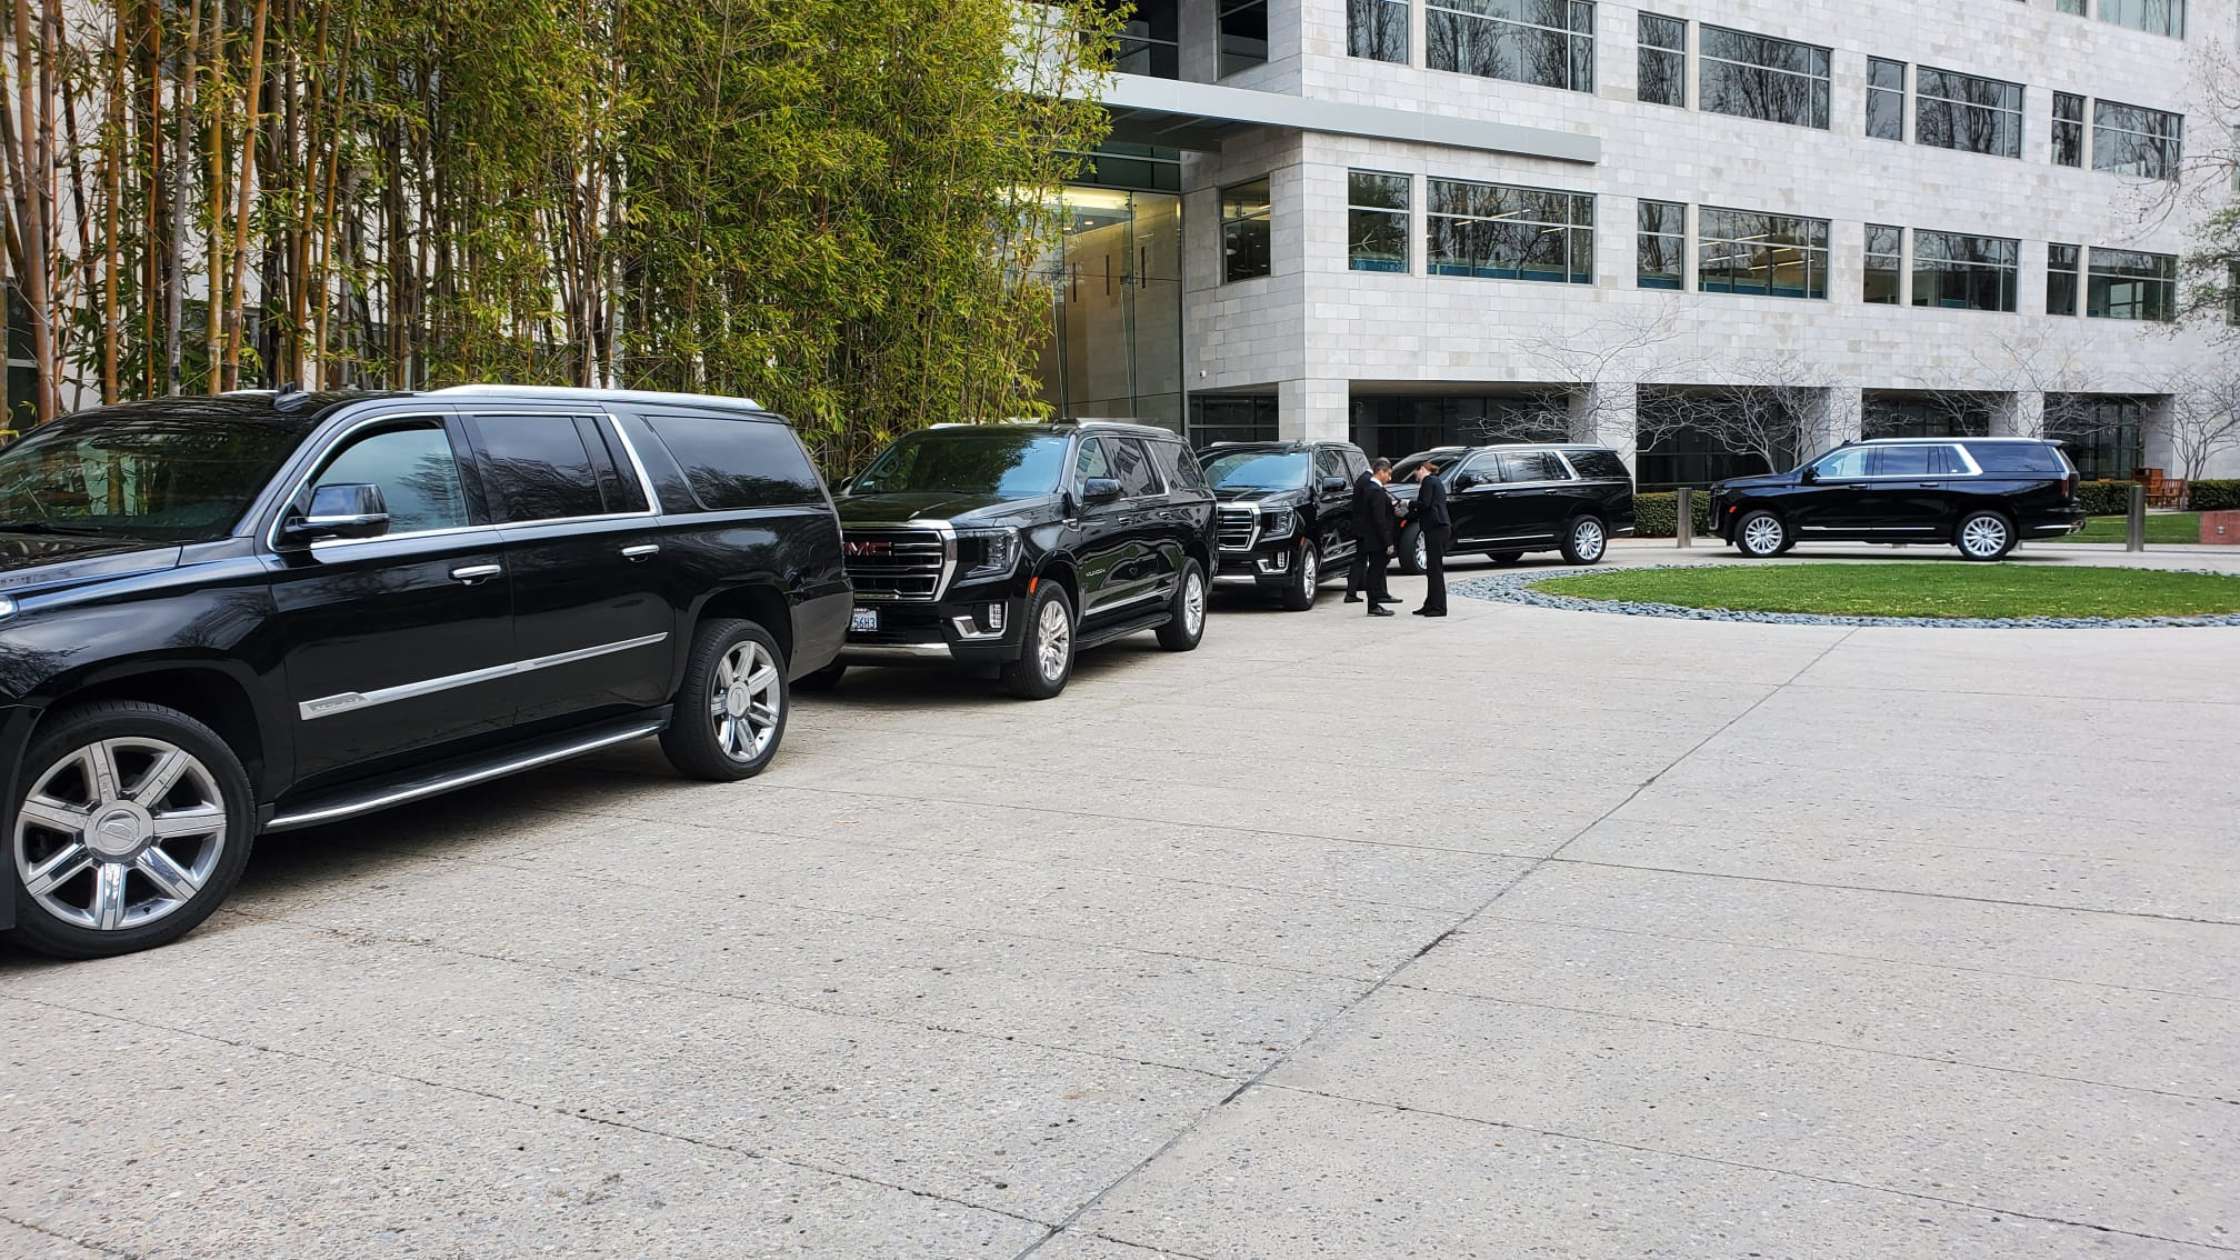 Why Use Black Car Services For Formal Business Meetings